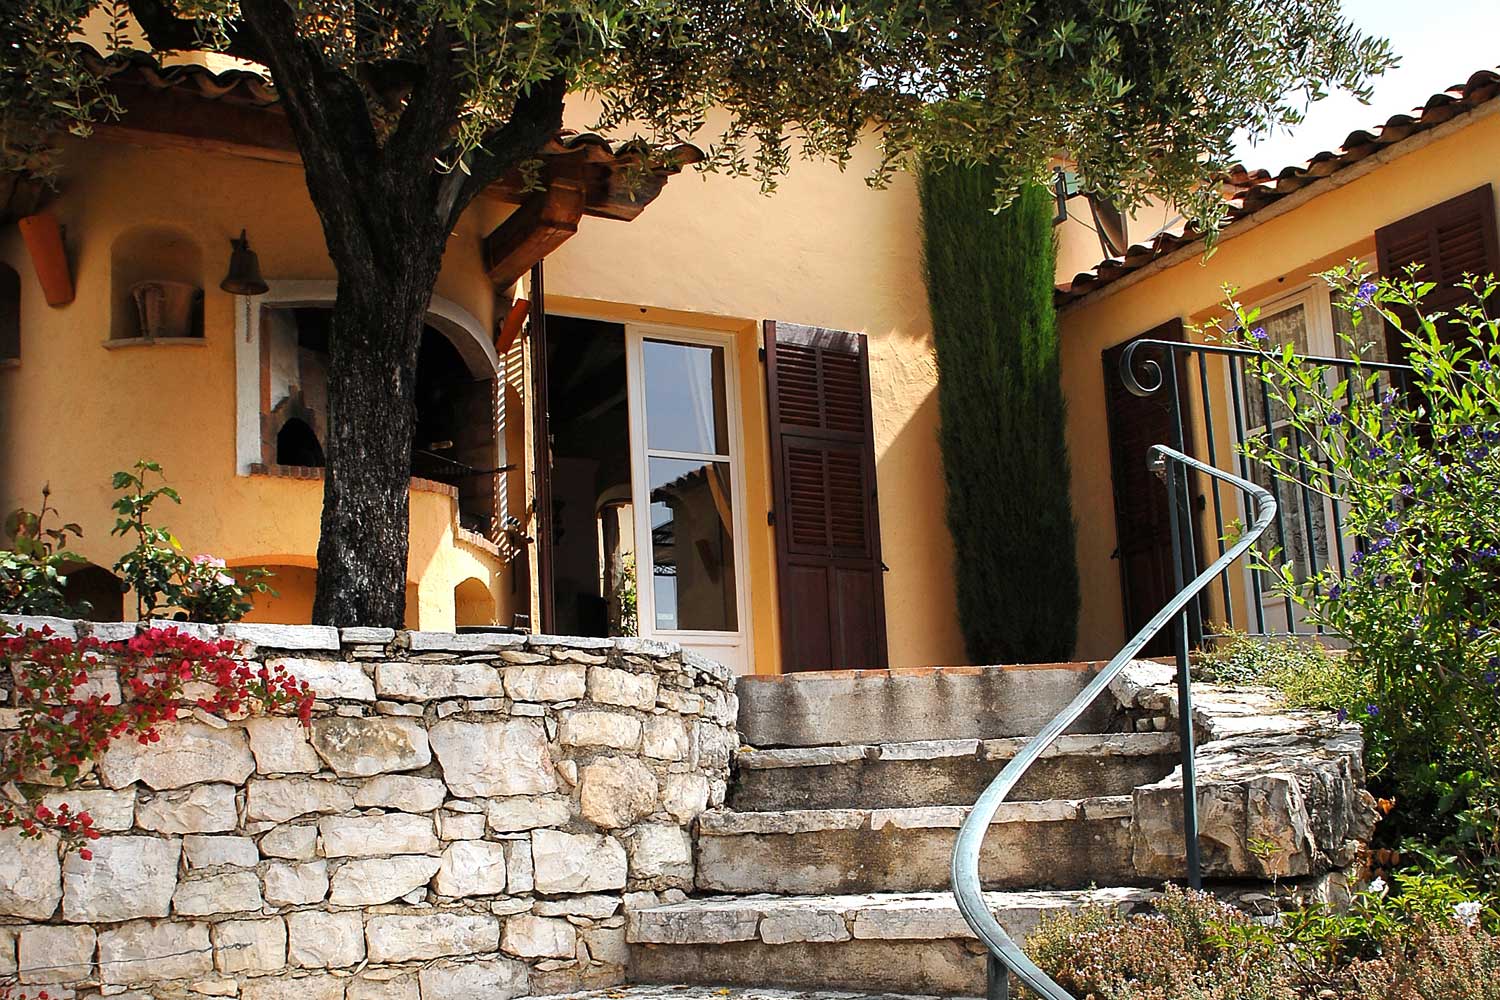 Rustic Provencal stairs lead from the cottage to the villa.